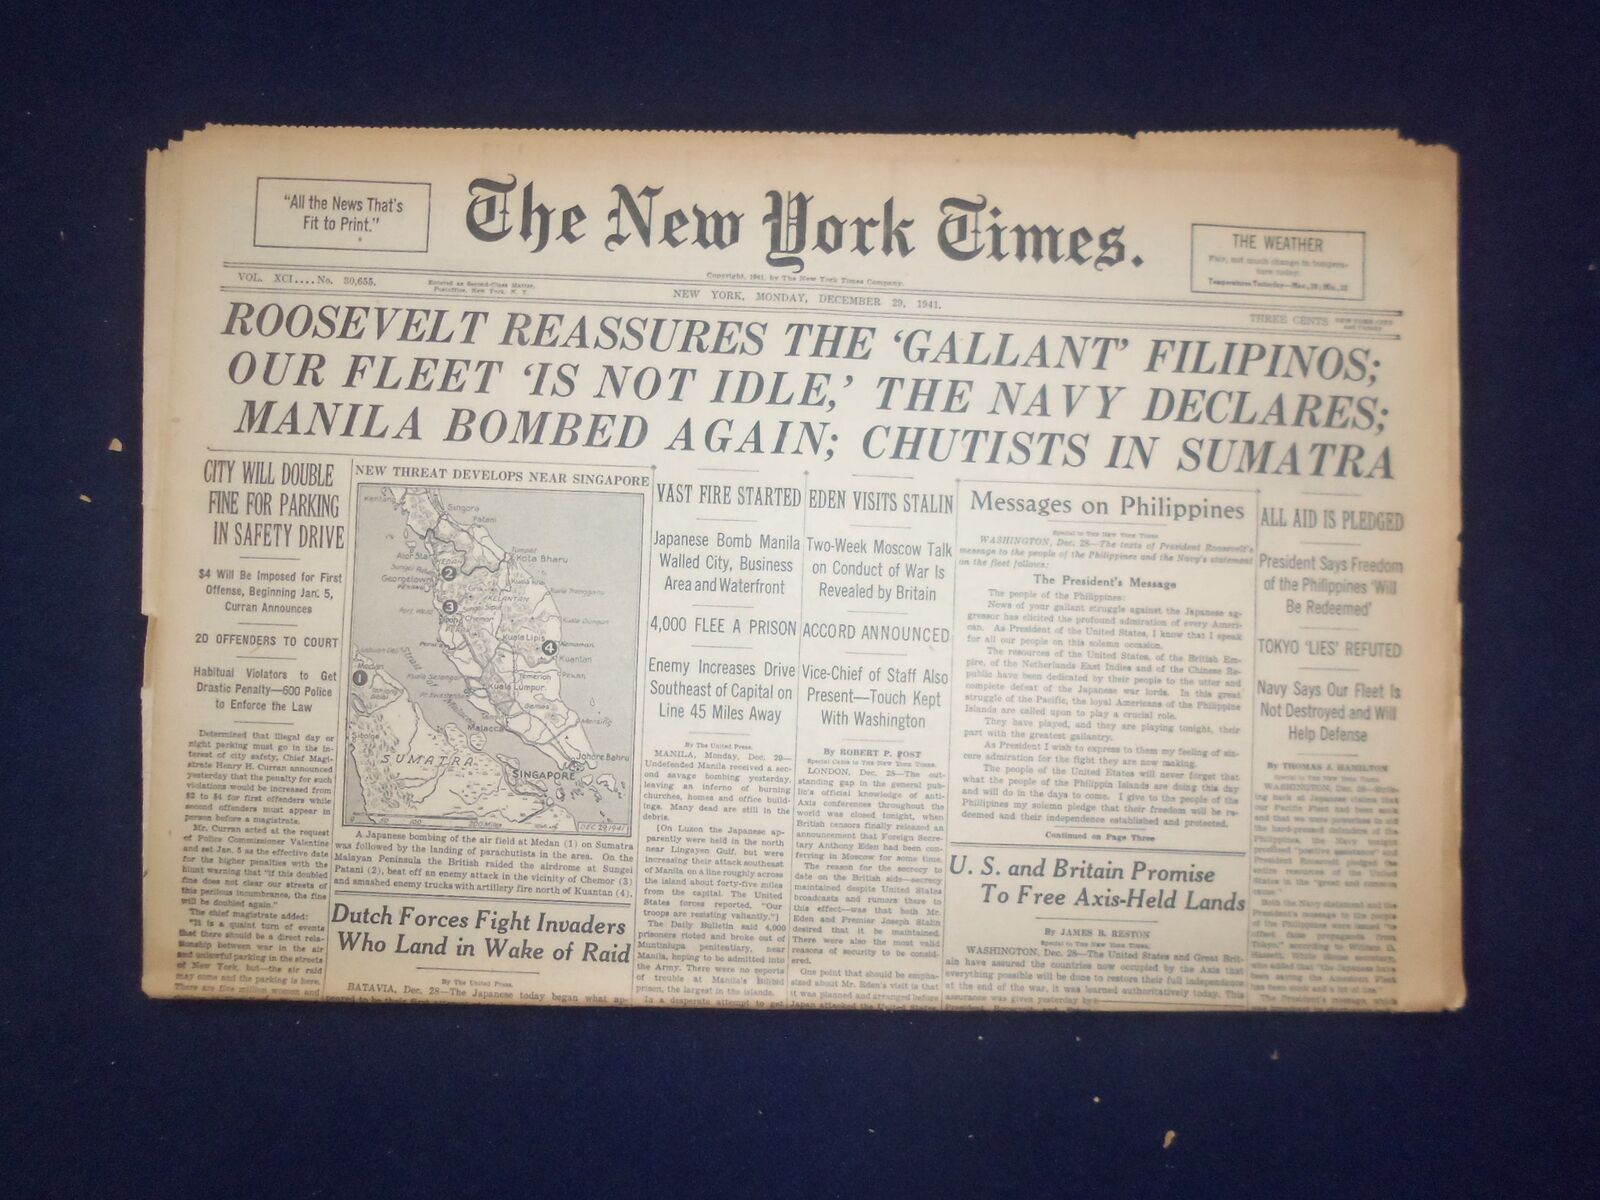 1941 DEC 29 NEW YORK TIMES -ROOSEVELT REASSURES THE 'GALLANT' FILIPINOS- NP 6492